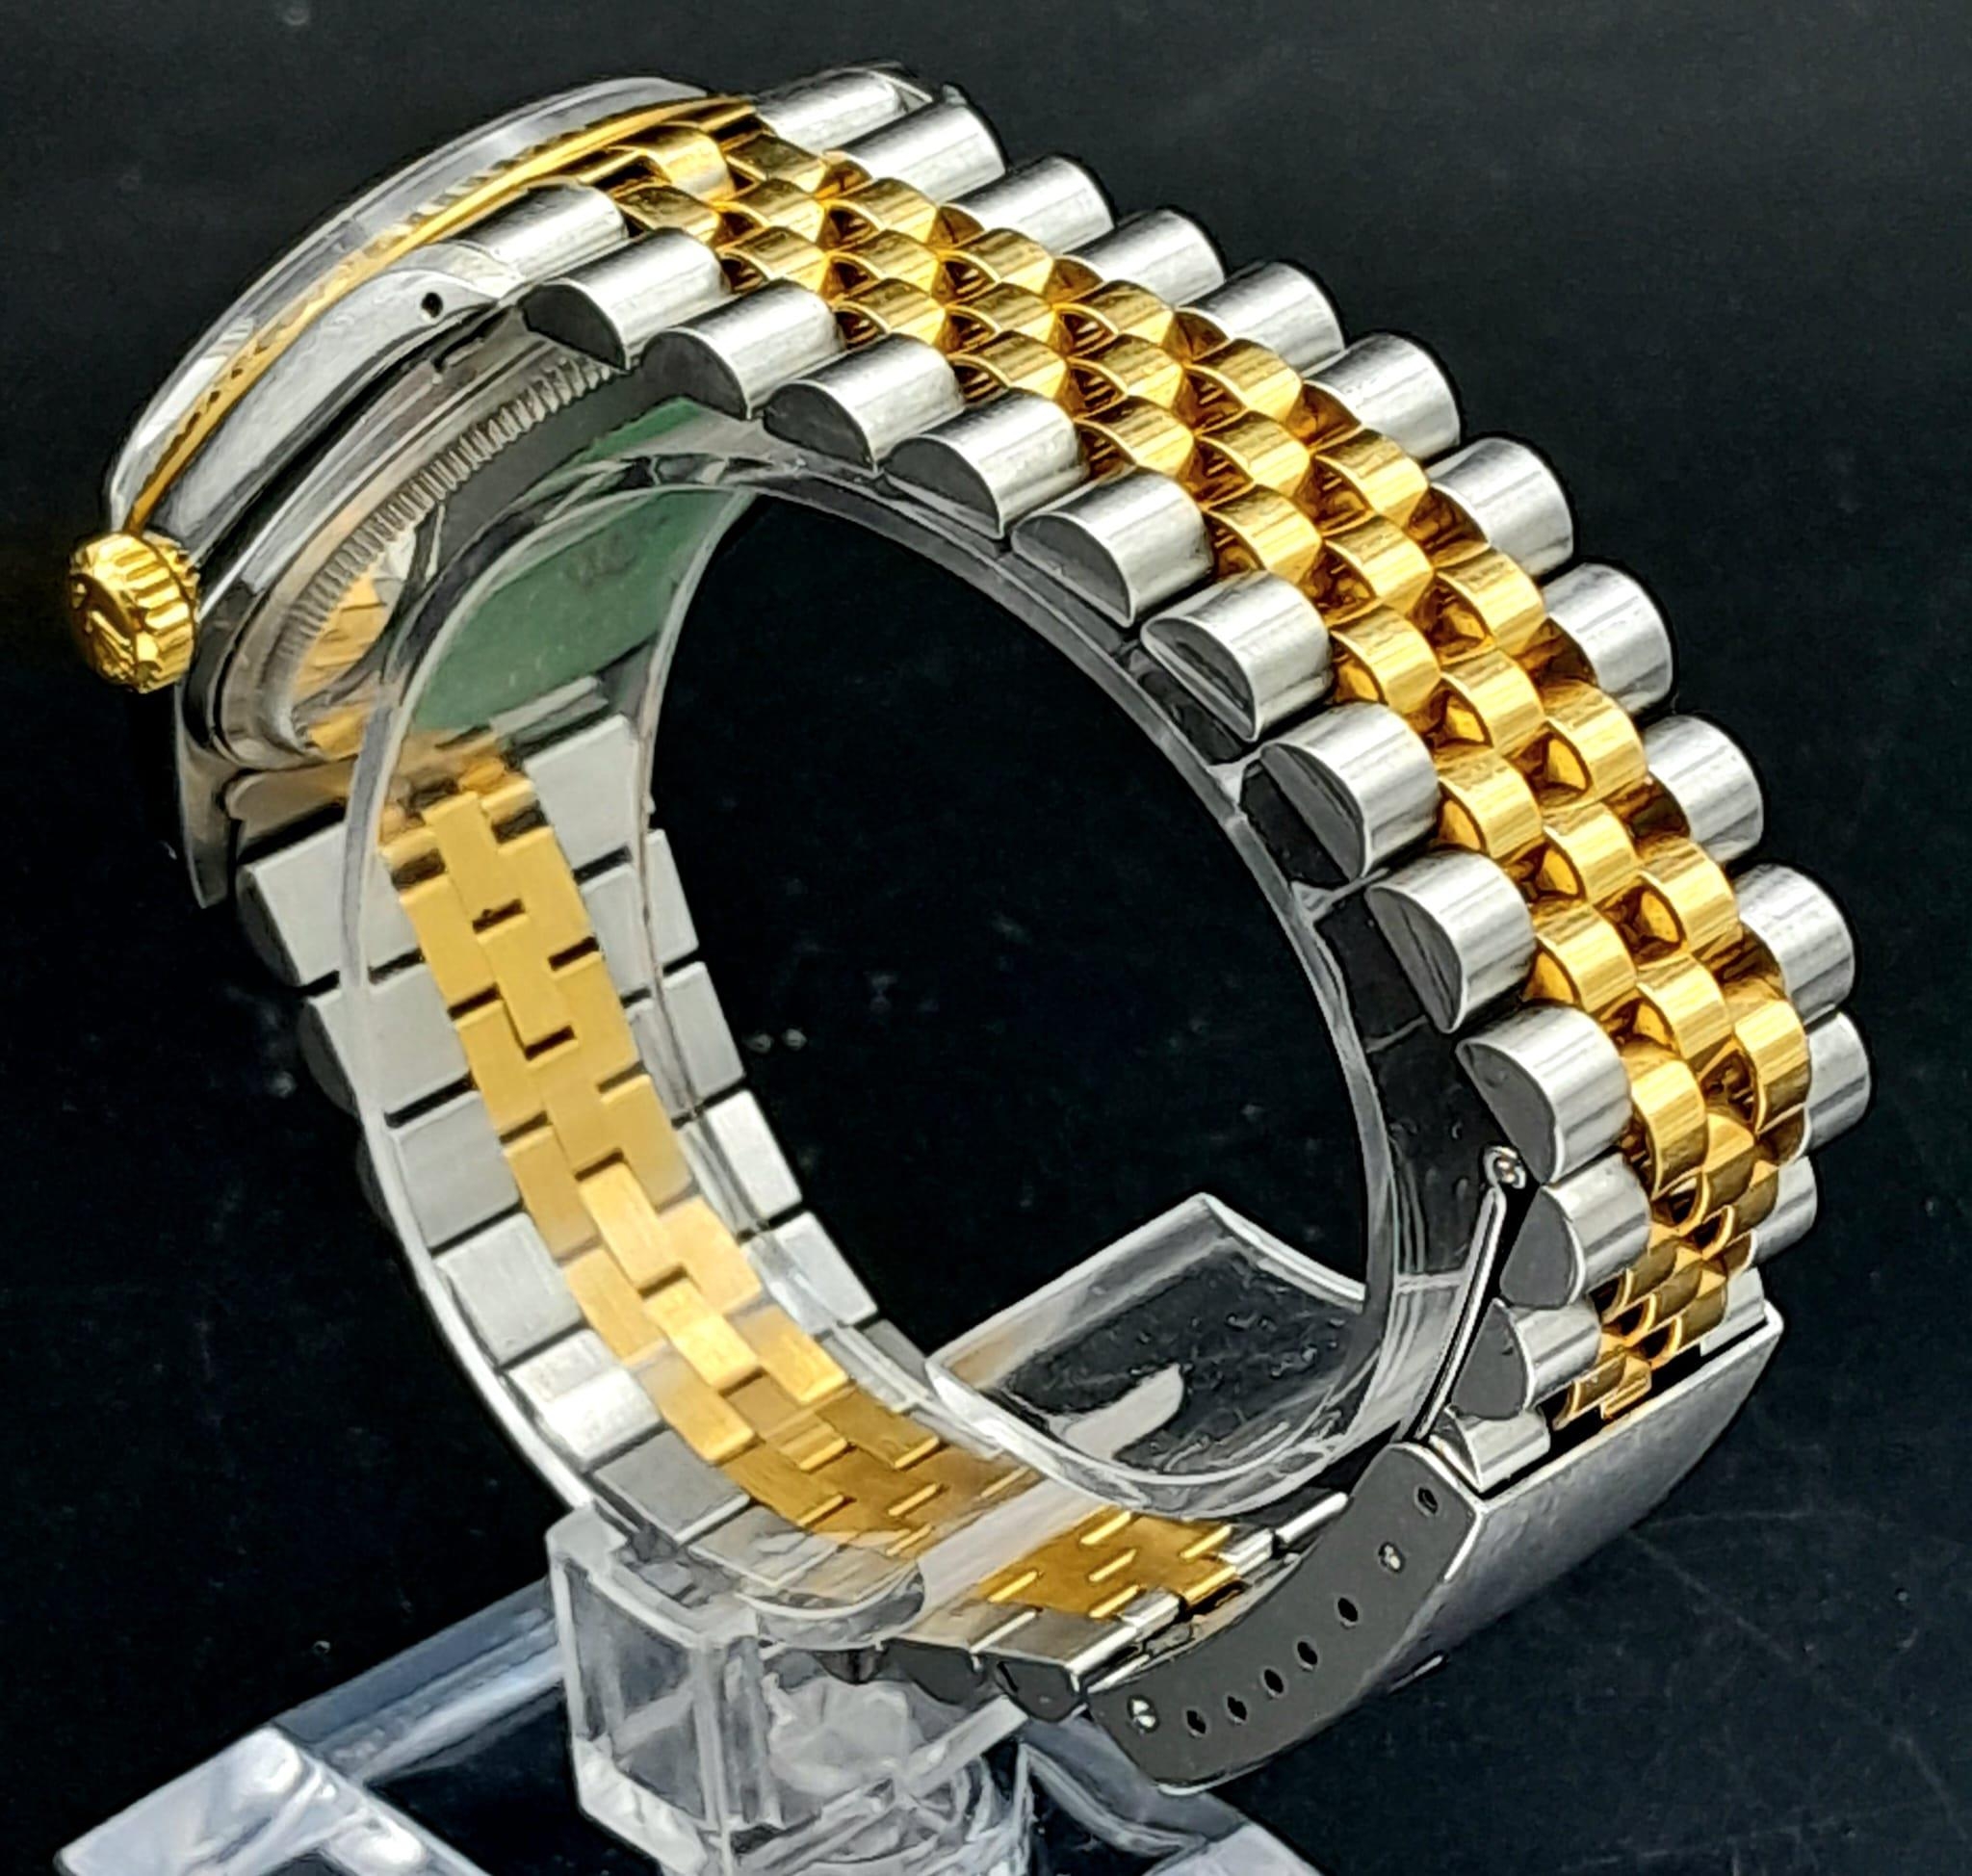 A Bi-Metal Rolex Oyster Perpetual Datejust Gents Watch. Gold and stainless steel bracelet and case - - Image 4 of 12